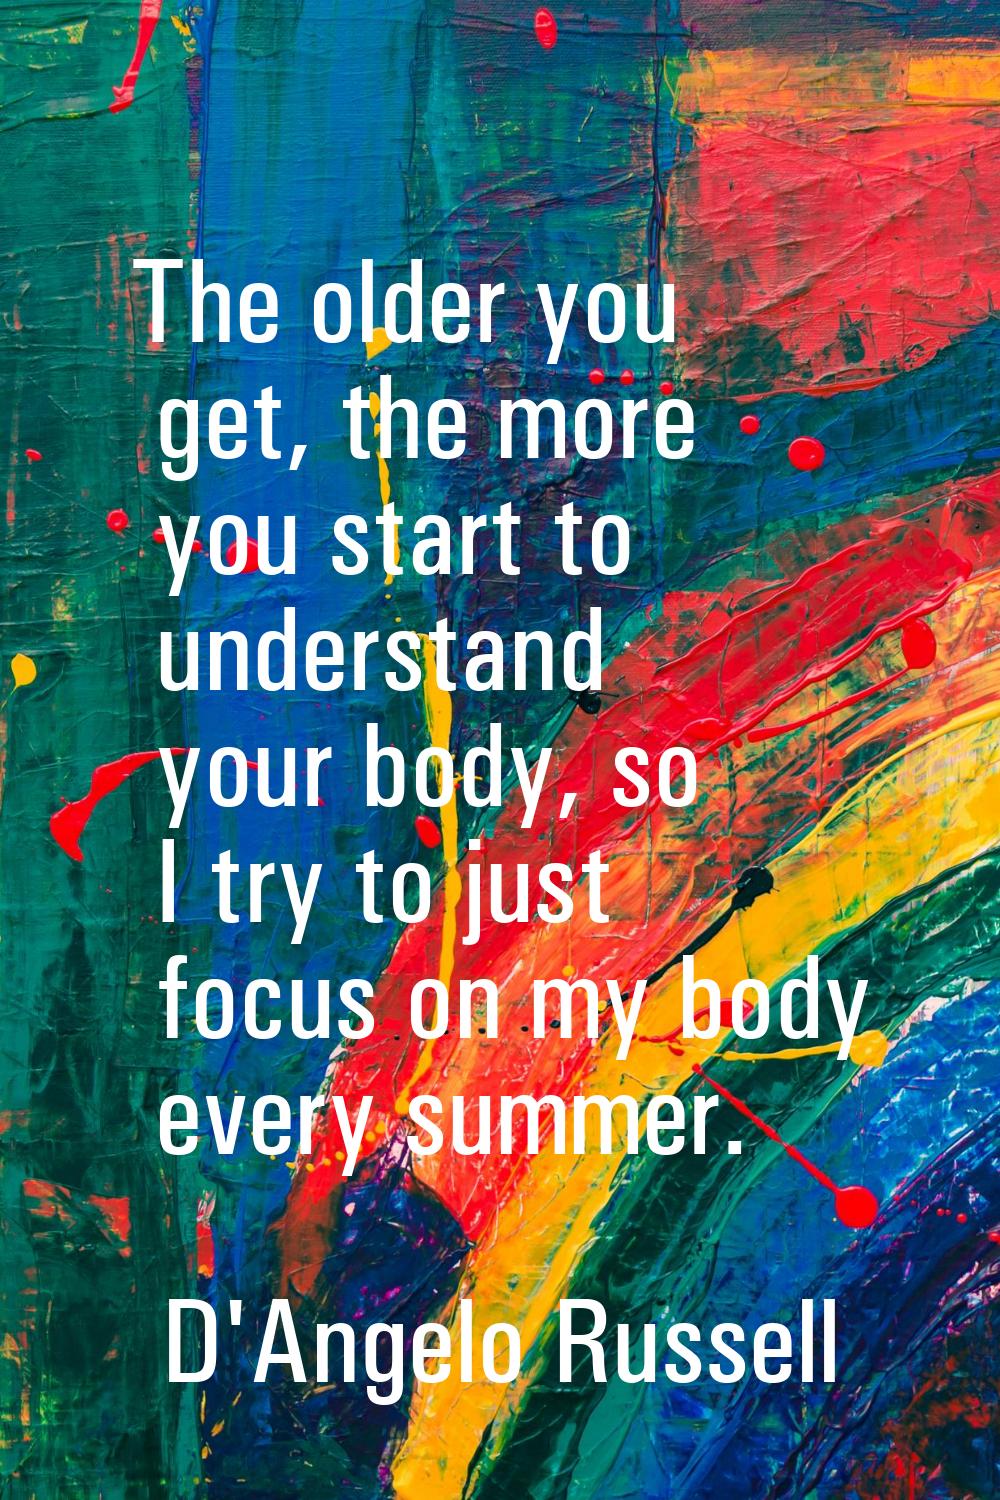 The older you get, the more you start to understand your body, so I try to just focus on my body ev